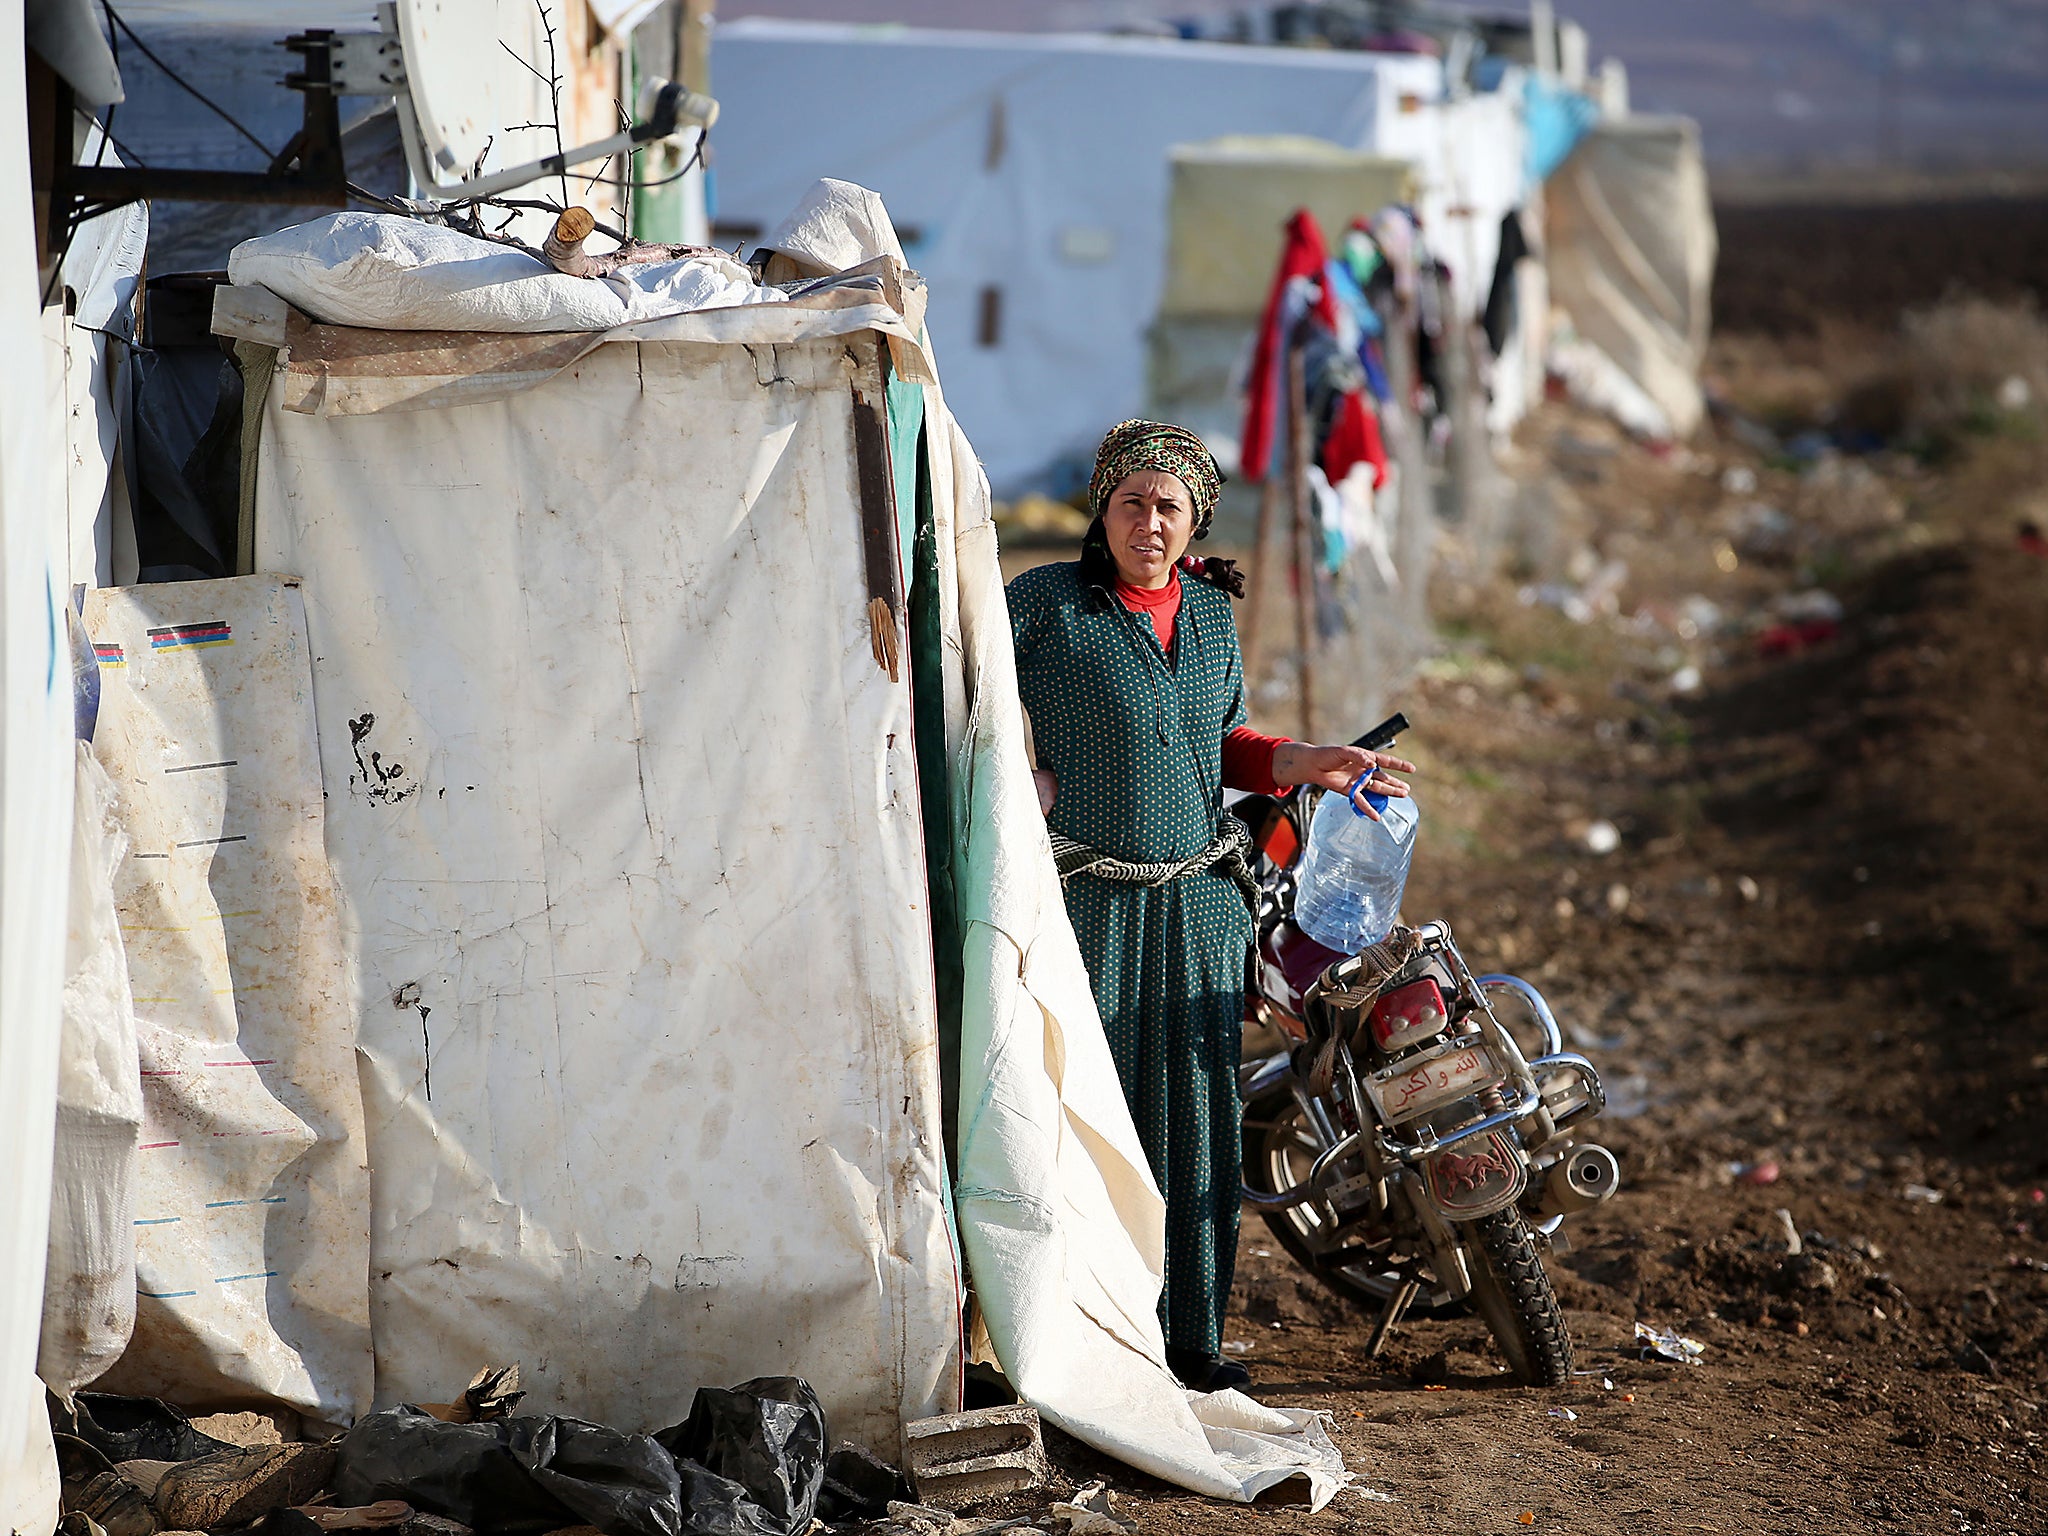 A Syrian refugee woman outside the entrance to a refugee tent